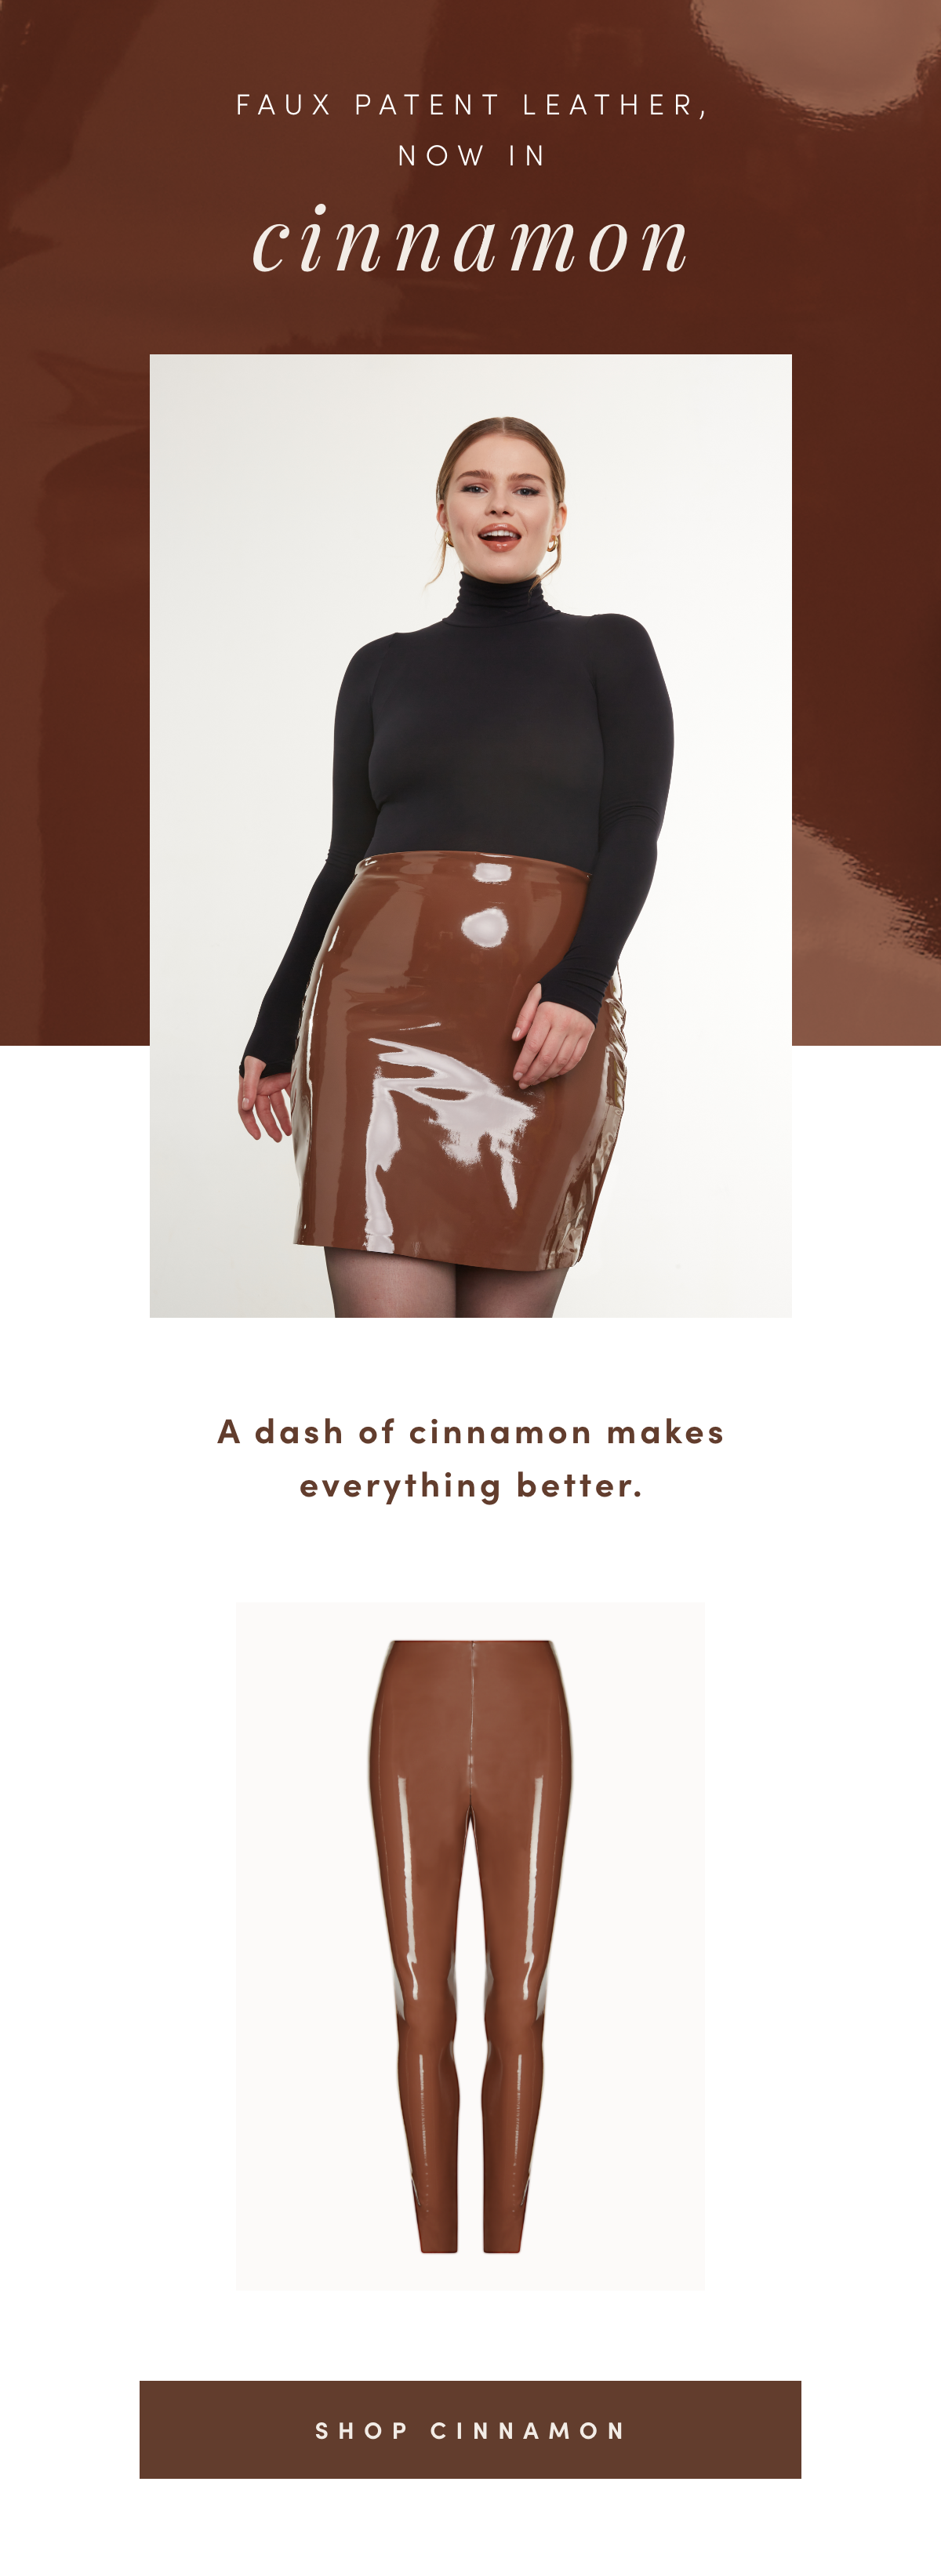 Faux Patent Leather, Now in Cinnamon